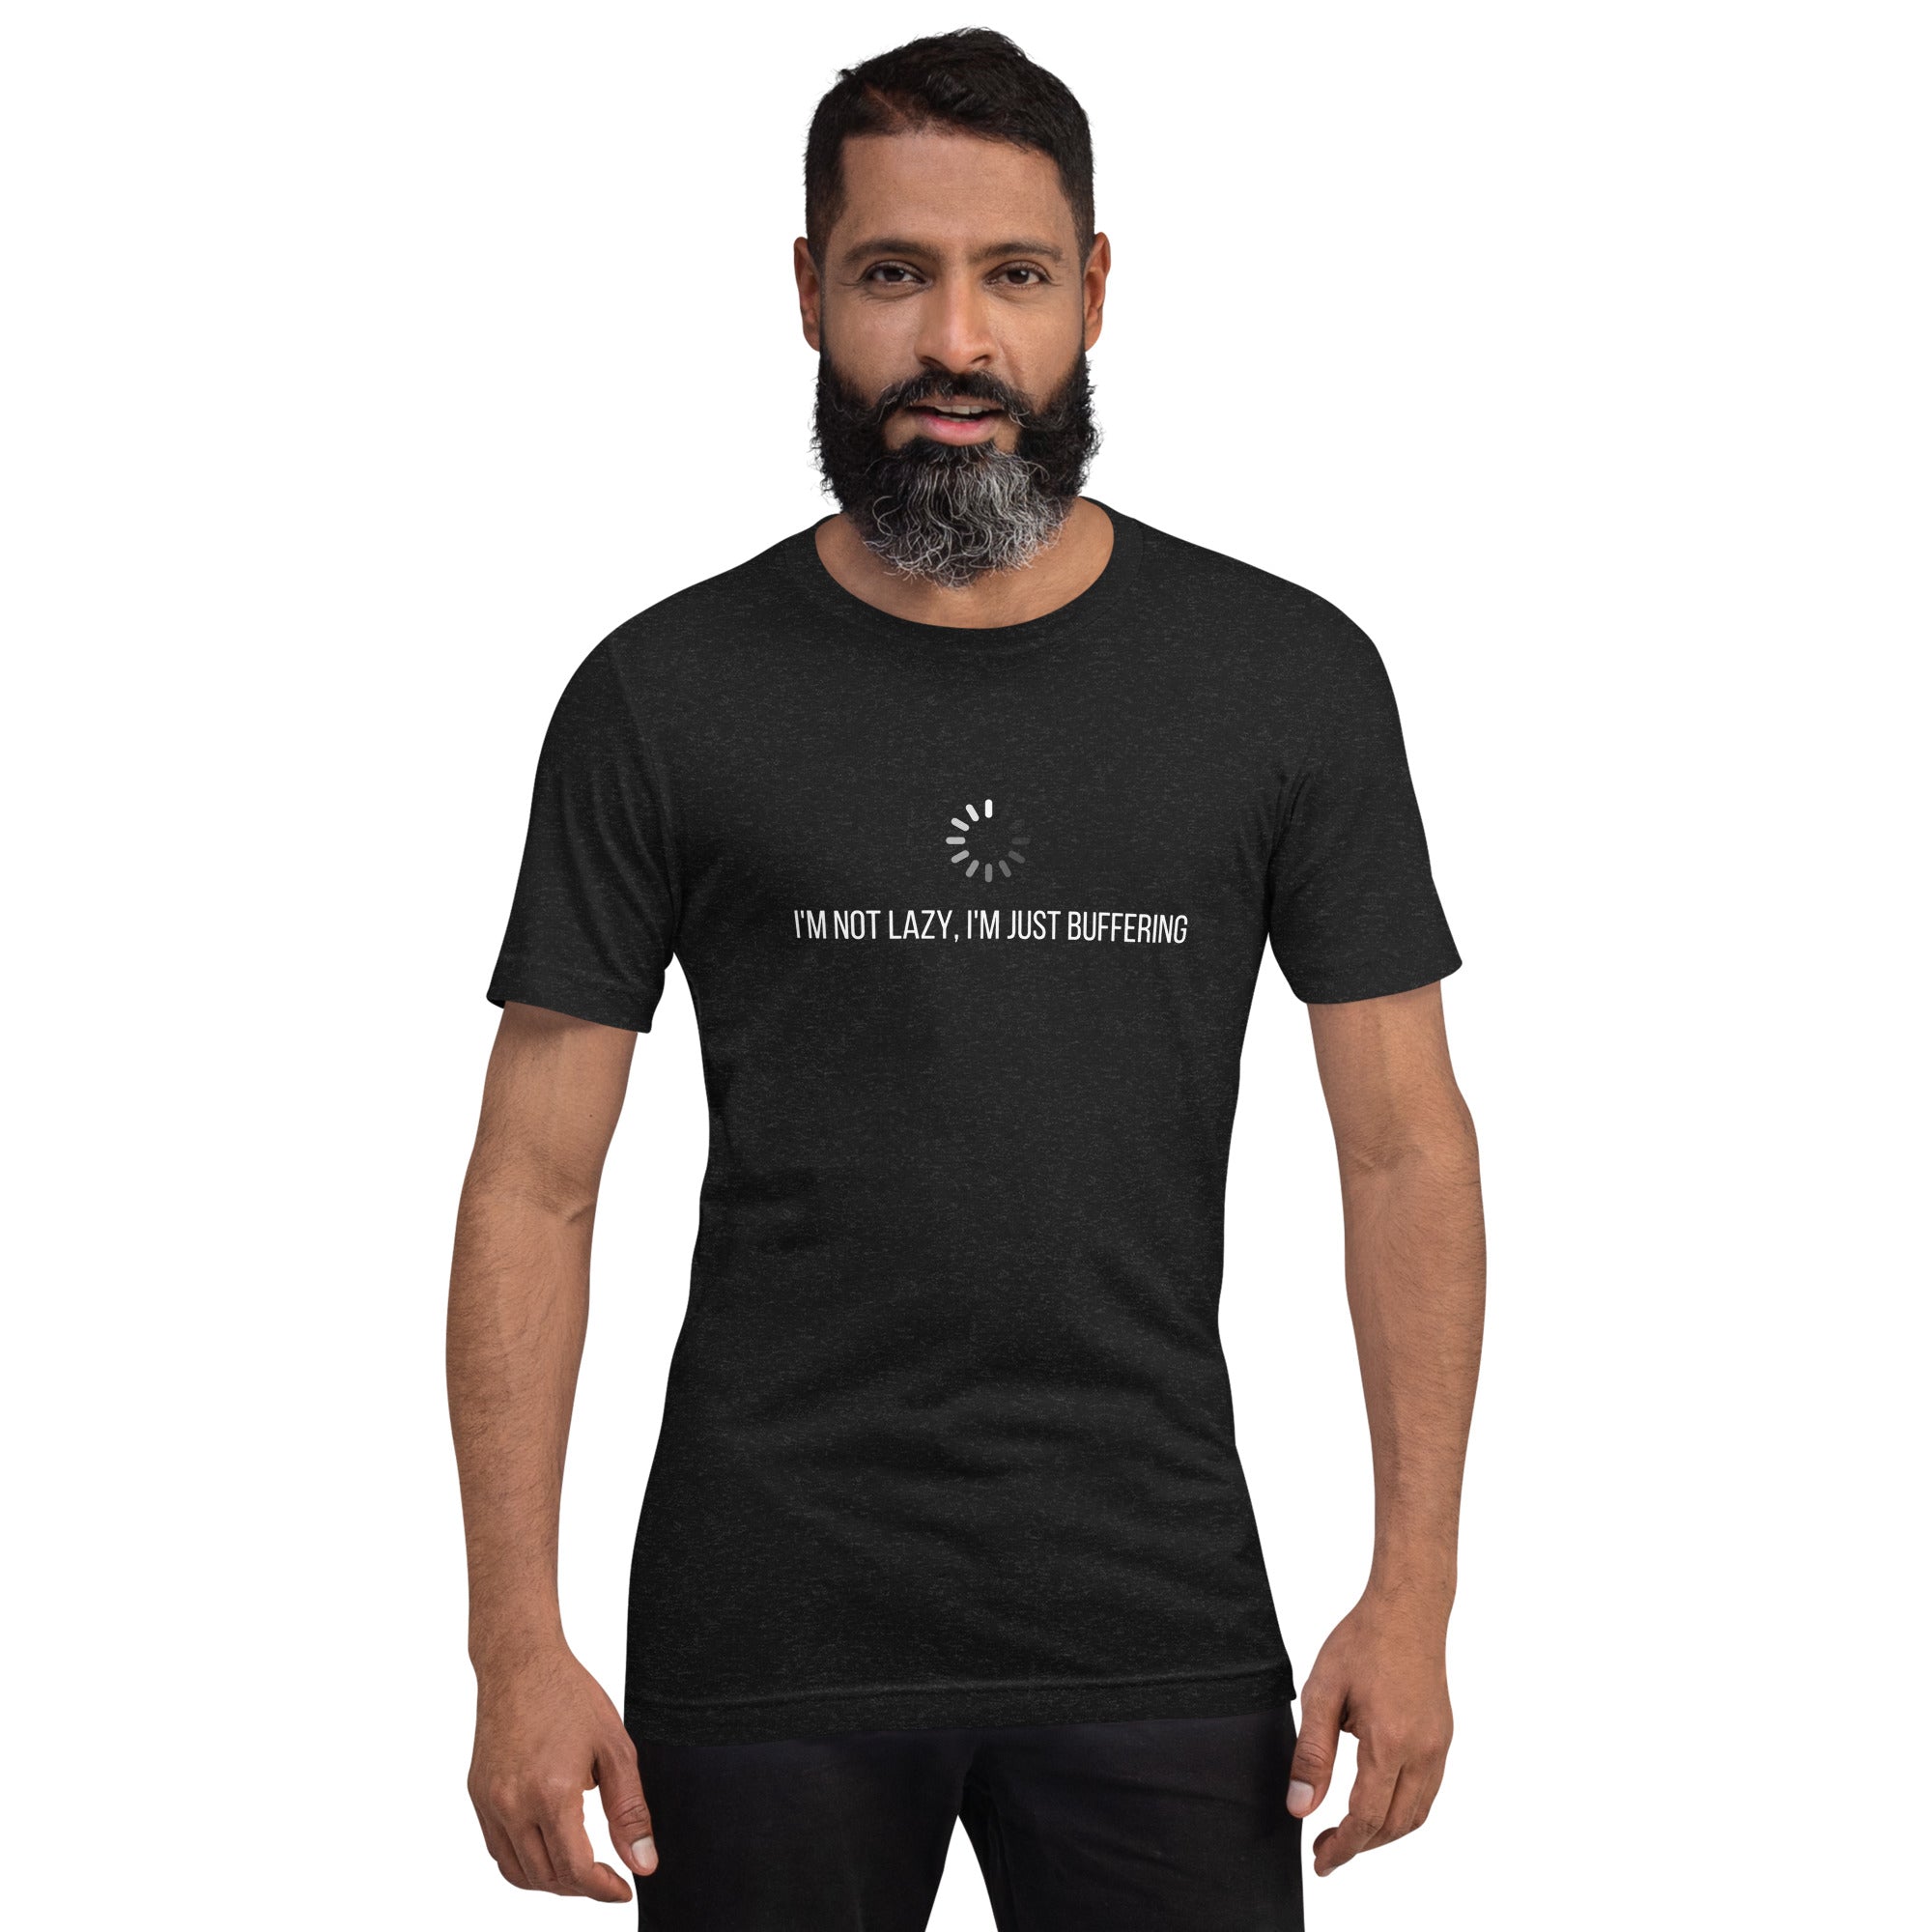 Lazybones T-Shirt - Im not Lazy, Im just Buffering Shirt for Dad and College Students | Lazy Person Gift | Geeky T-Shirt - PennyJellies